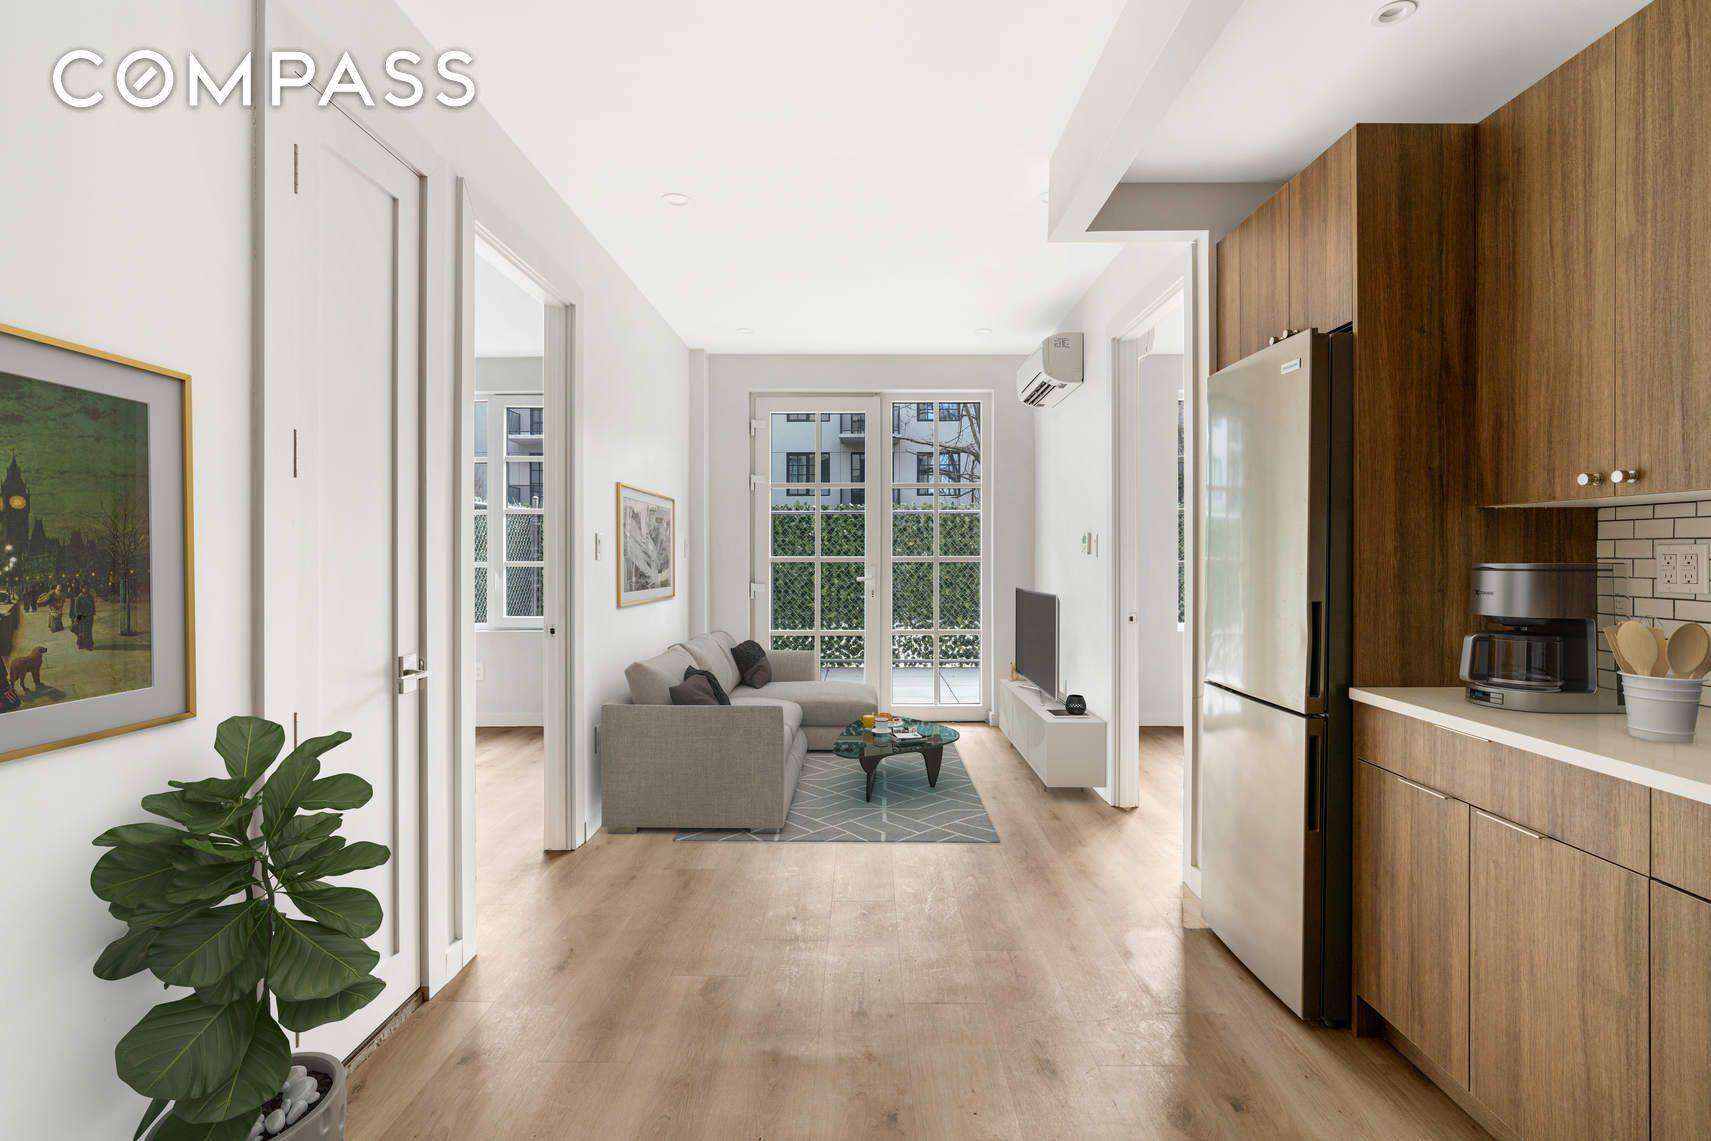 Welcome to Casa Dumbo, a brand new luxury rental building offering condominium style lifestyle amenities and modern interiors in a tranquil residential enclave in one of Brooklyn s trendiest neighborhoods.